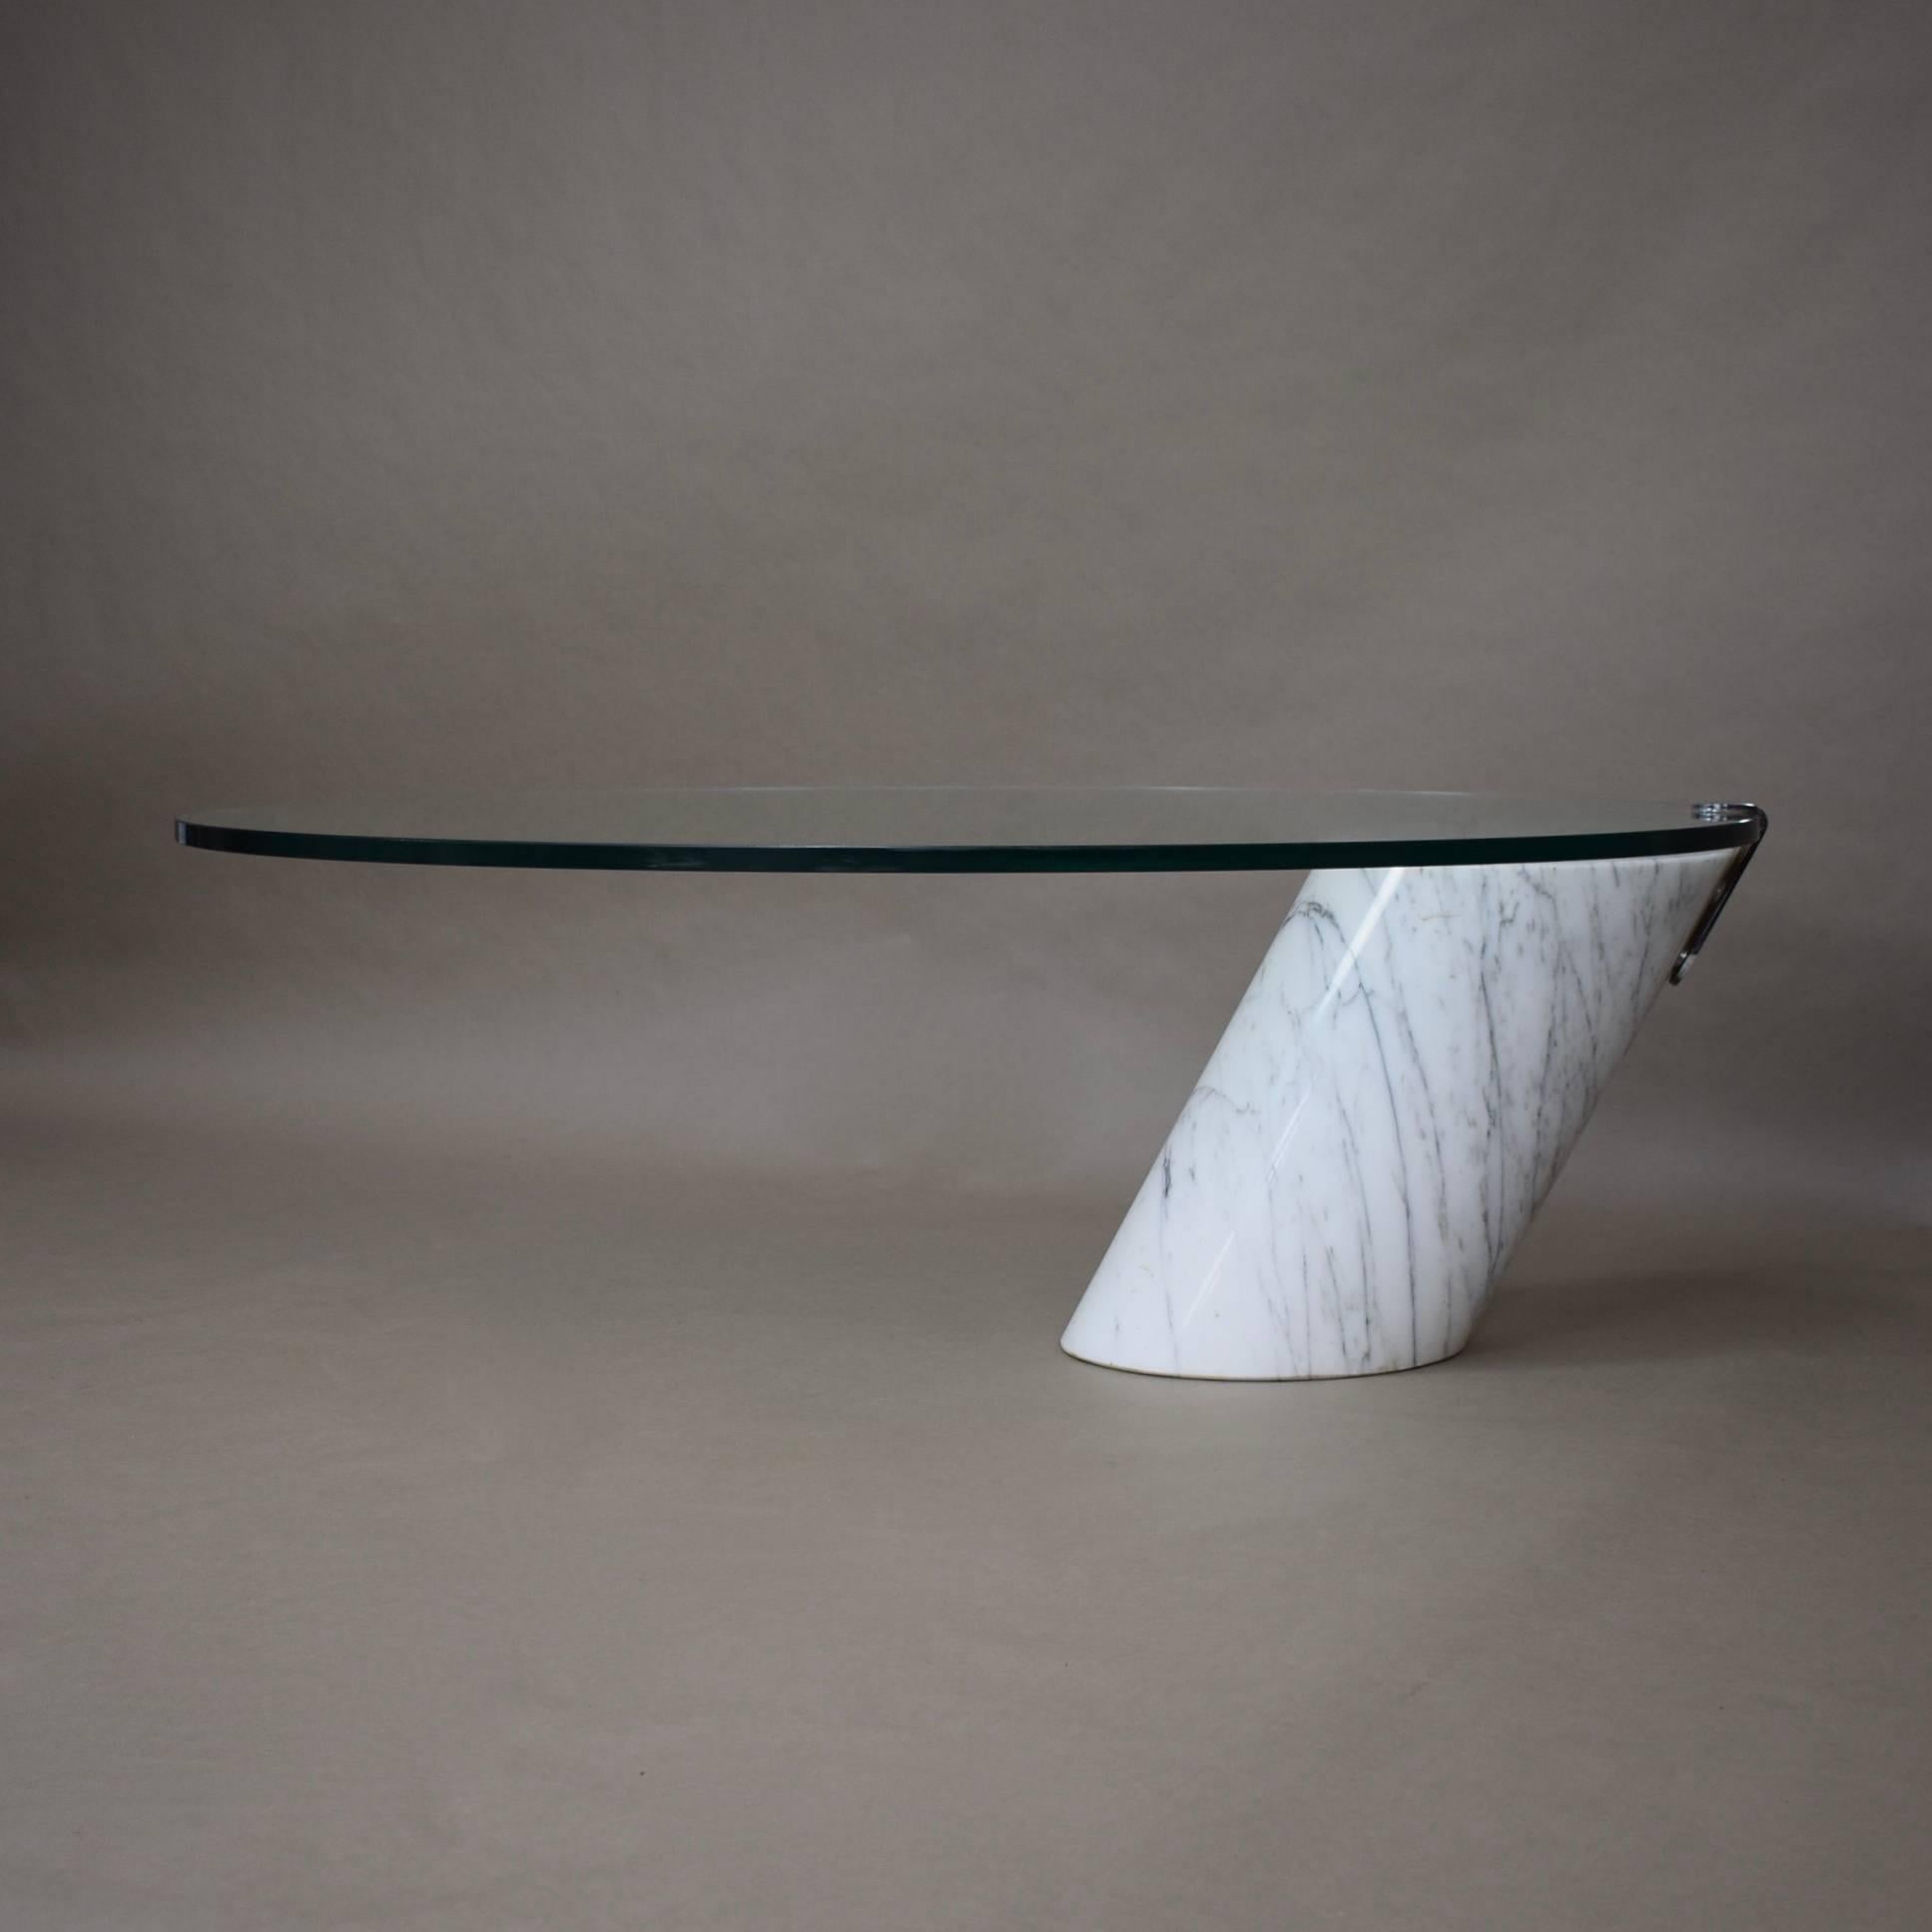 Oval cocktail table by Pace Collection. The foot is made of a solid block of Carrara marble. The glass top is made of 2cm thick glass / The glass top can be leveled by turning the two chrome knobs.

Designer: Unknown

Manufacturer: Pace